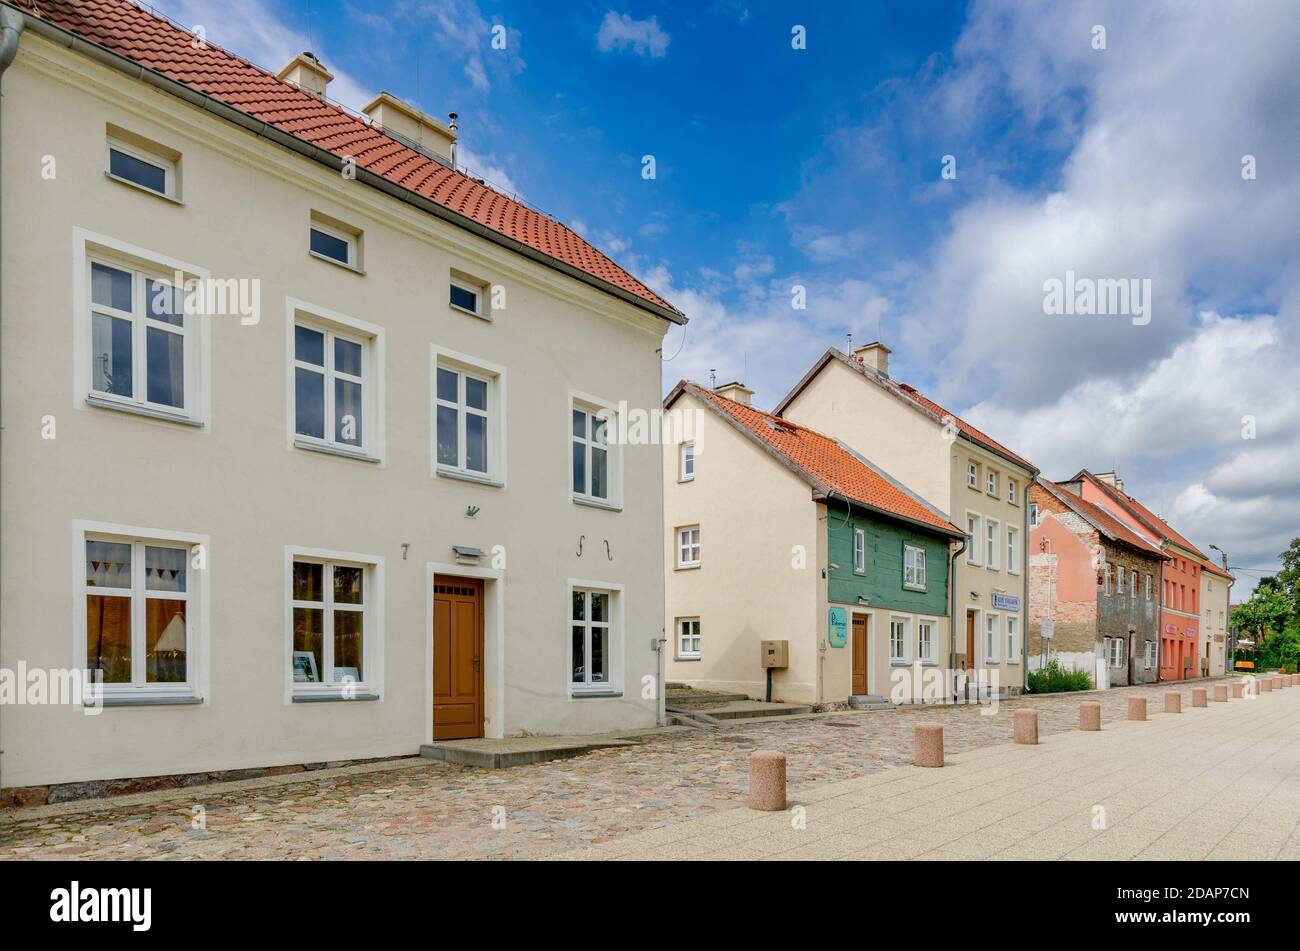 DOBRE MIASTO, WARMIAN-MAZURIAN PROVINCE, POLAND; ger. Guttstadt,  Open-air city buildings museum - 'Museum by the Tower', 17th cent. houses complex. Stock Photo